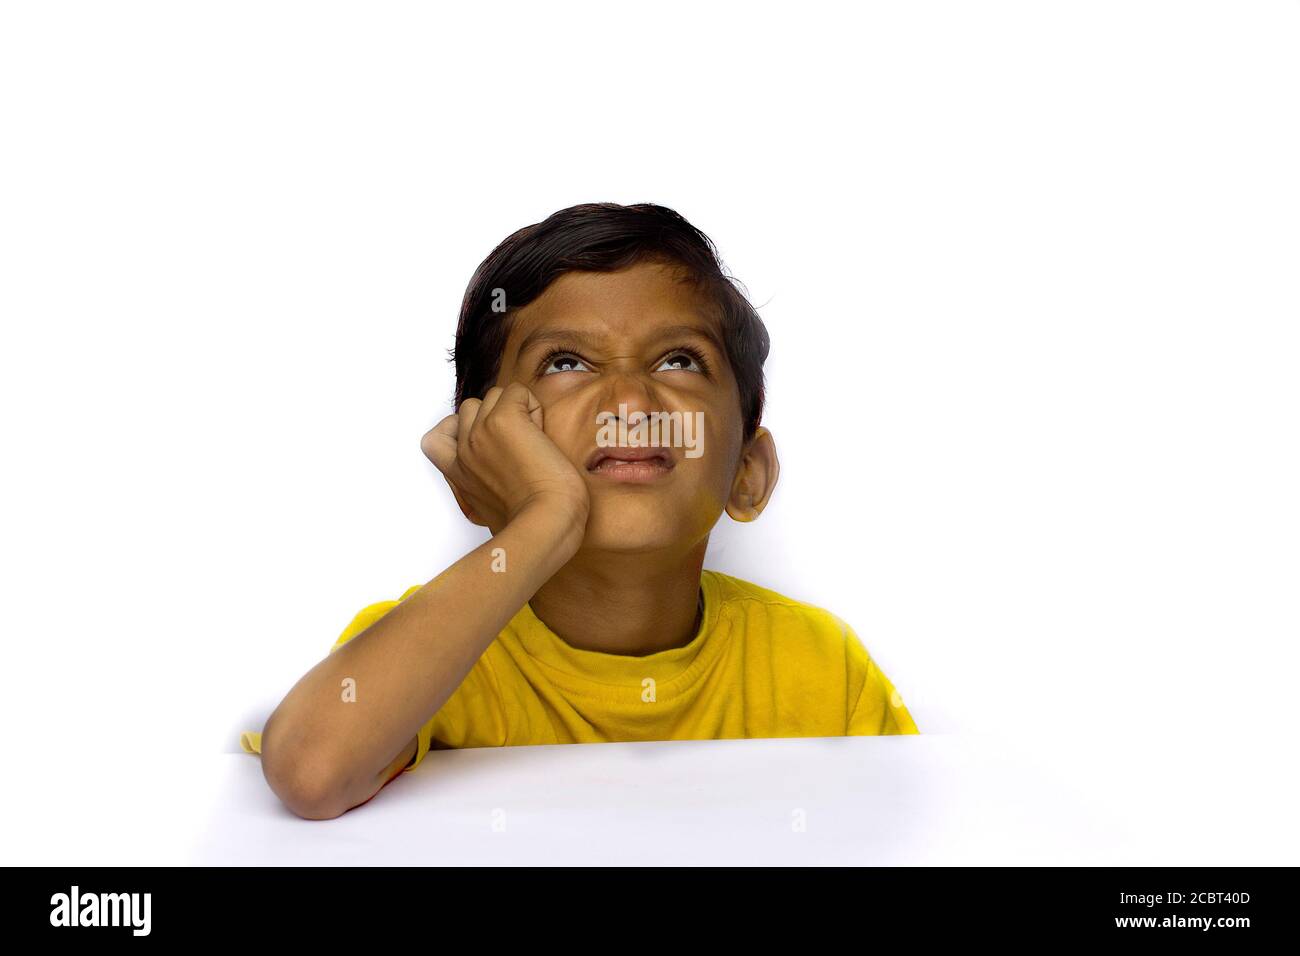 facial expression of a little  boy Stock Photo